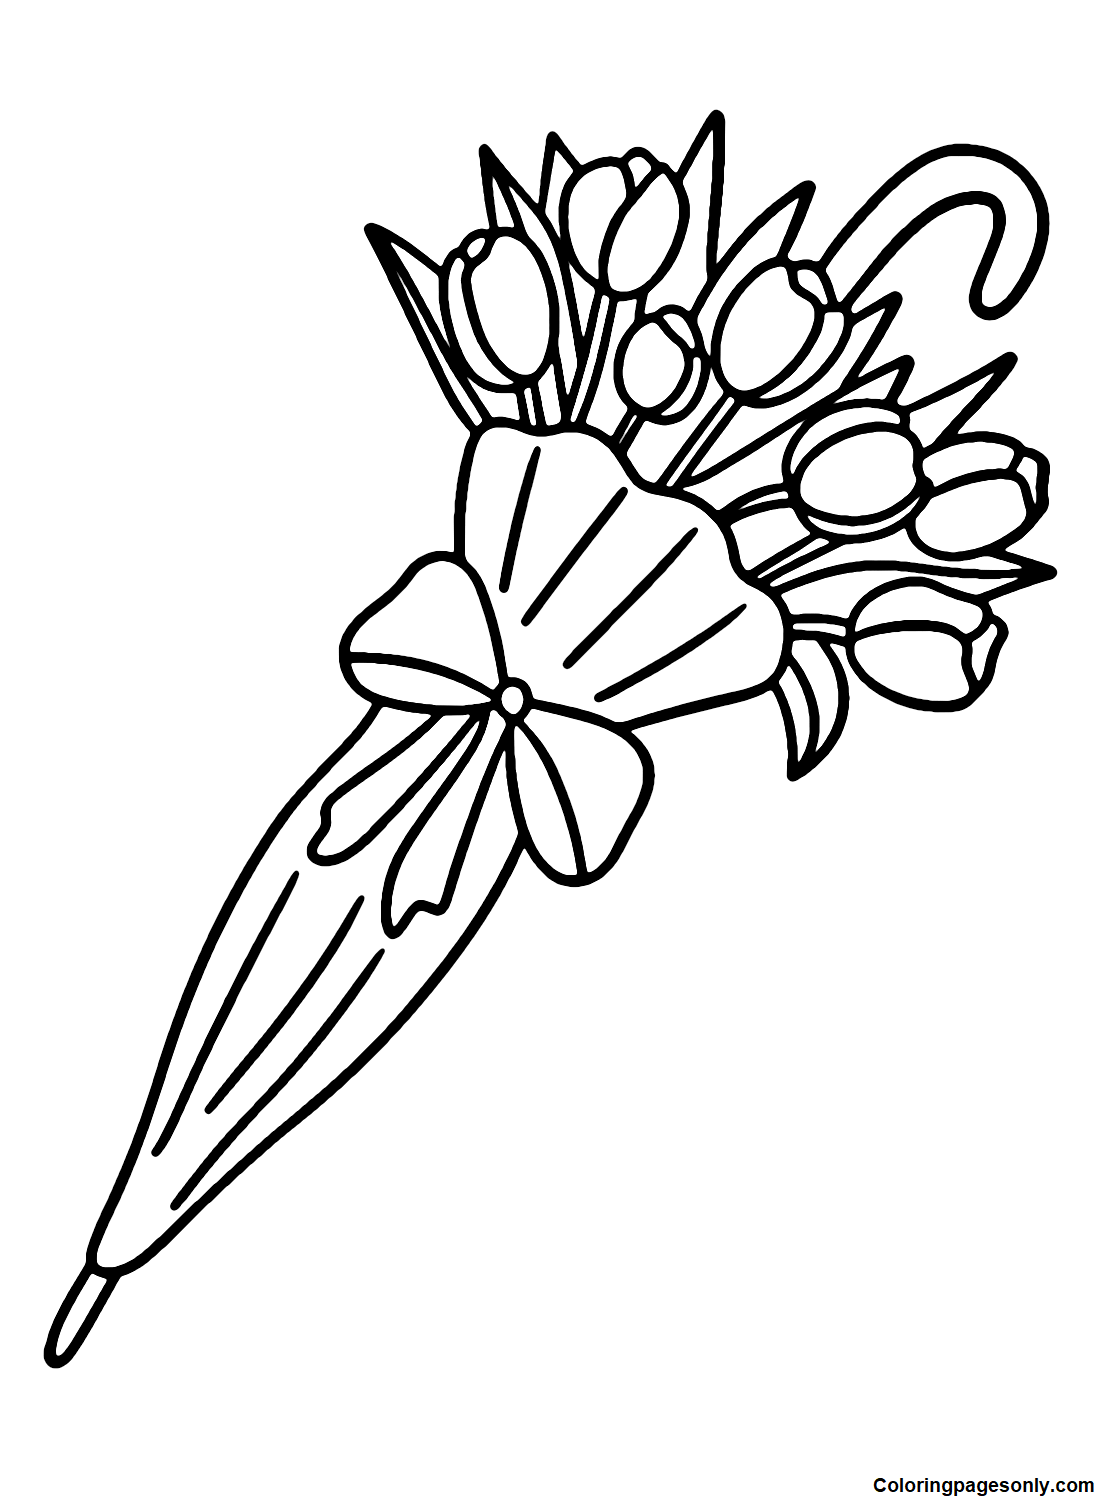 Tulip Flowers Umbrella Coloring Page - Free Printable Coloring Pages